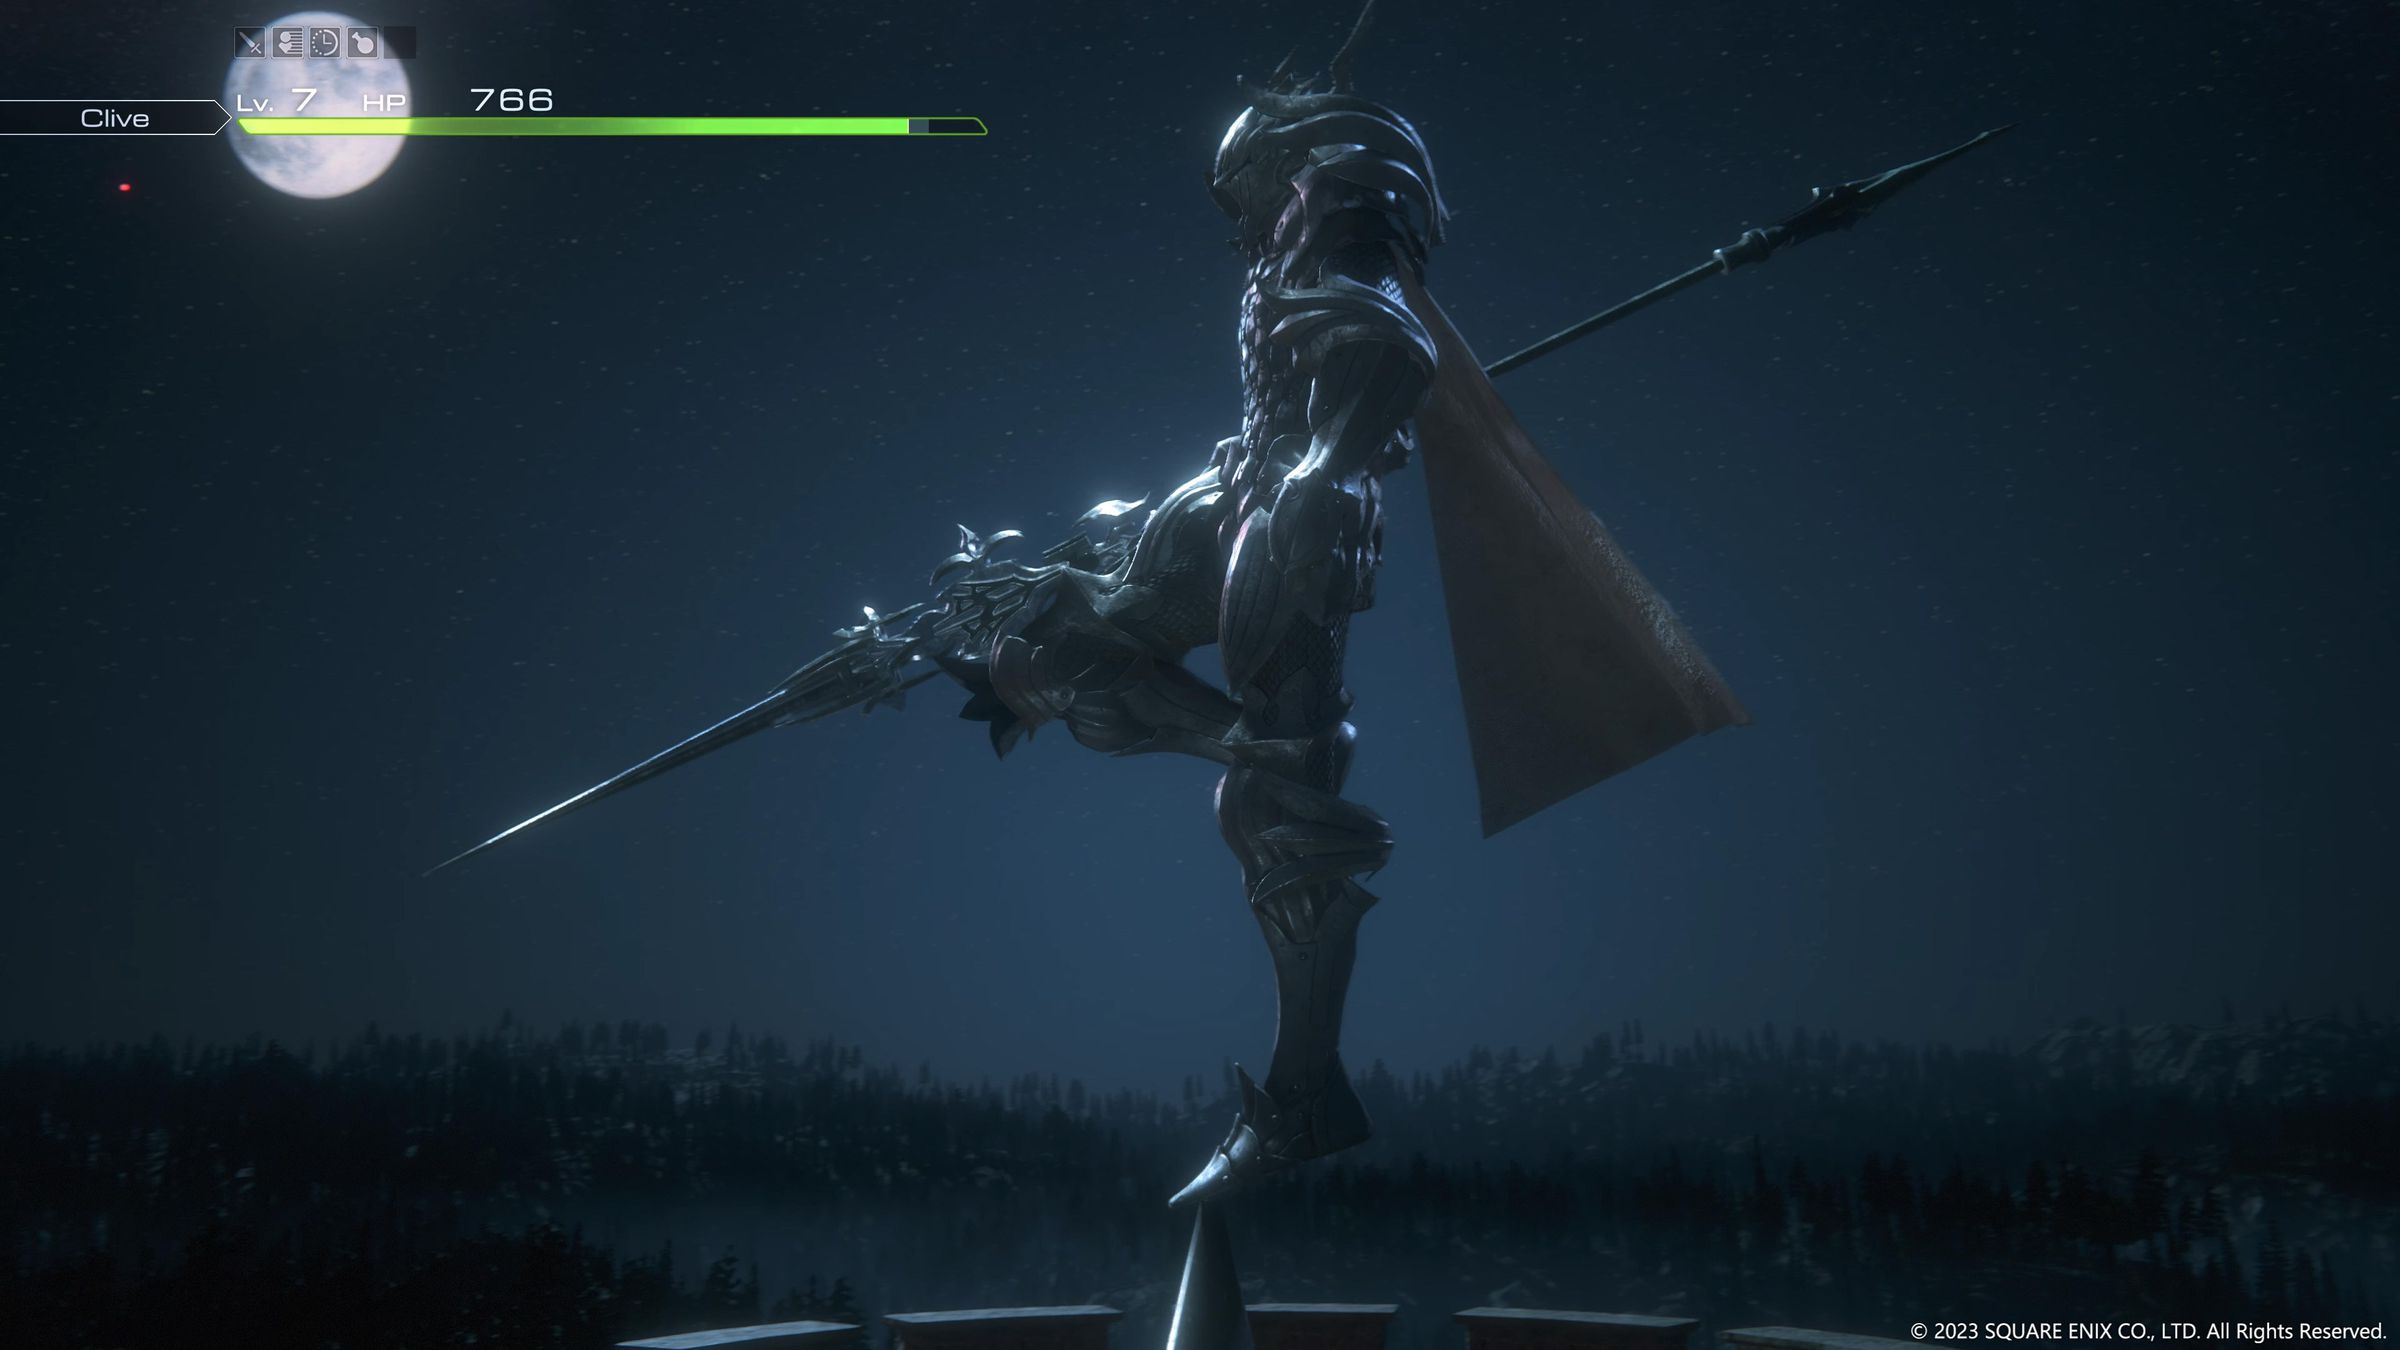 Screenshot from Final Fantasy XVI featuring an armored dragoon silhouetted by moonlight, perched stylishly on a building’s spire before descending into combat.